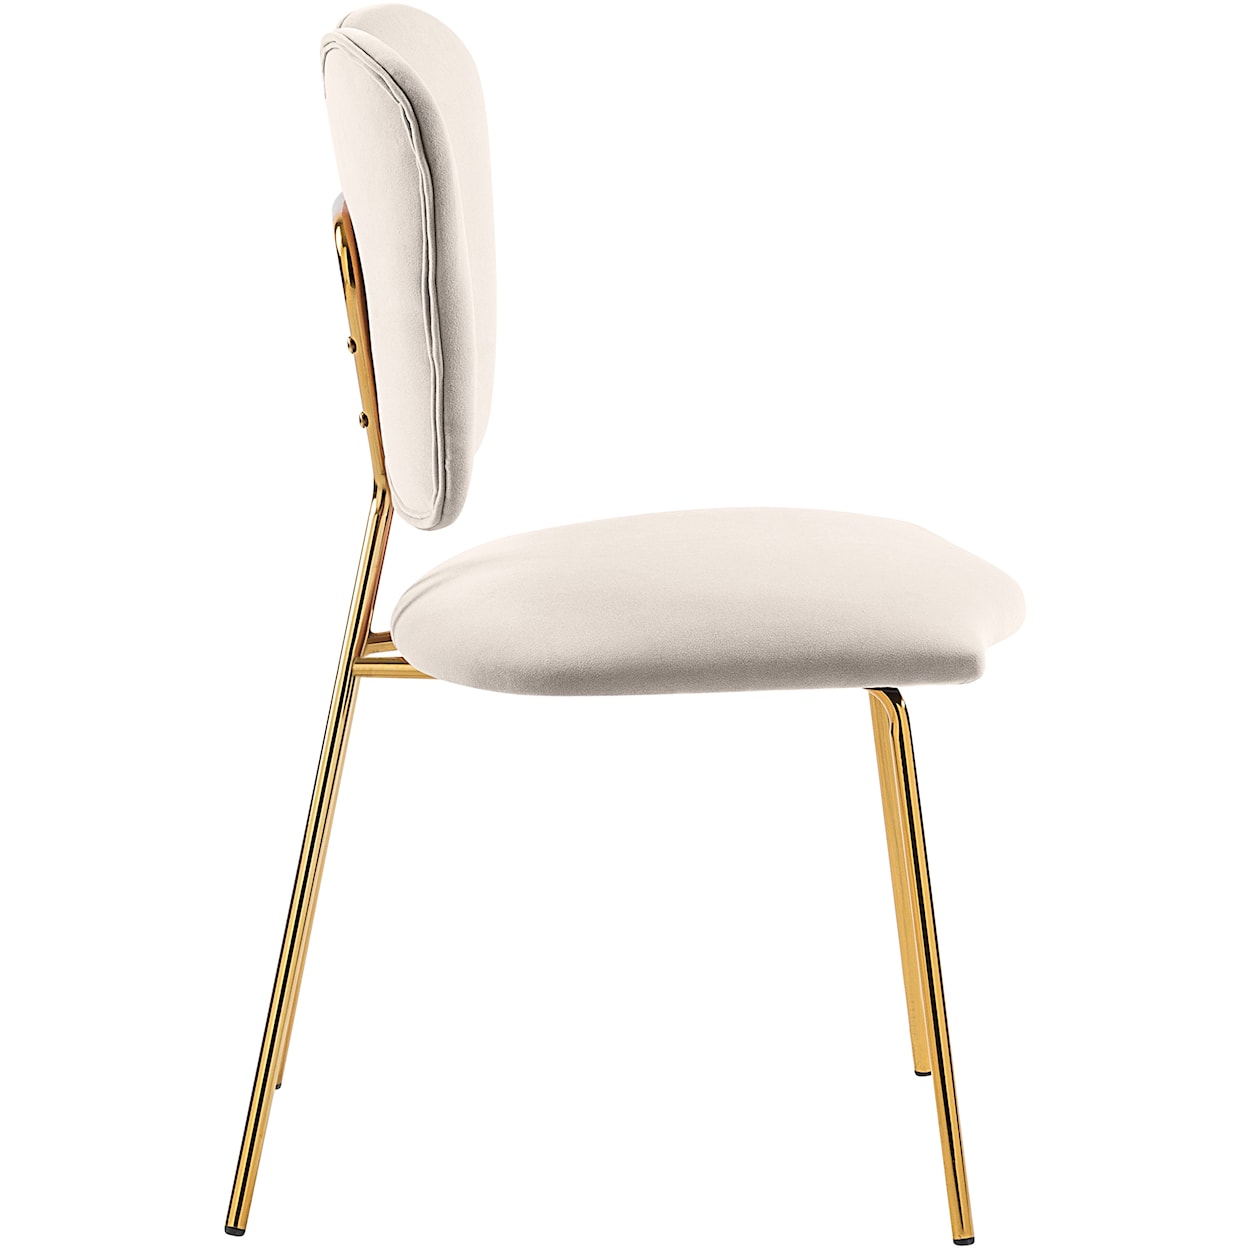 Meridian Furniture Angel Dining Chair